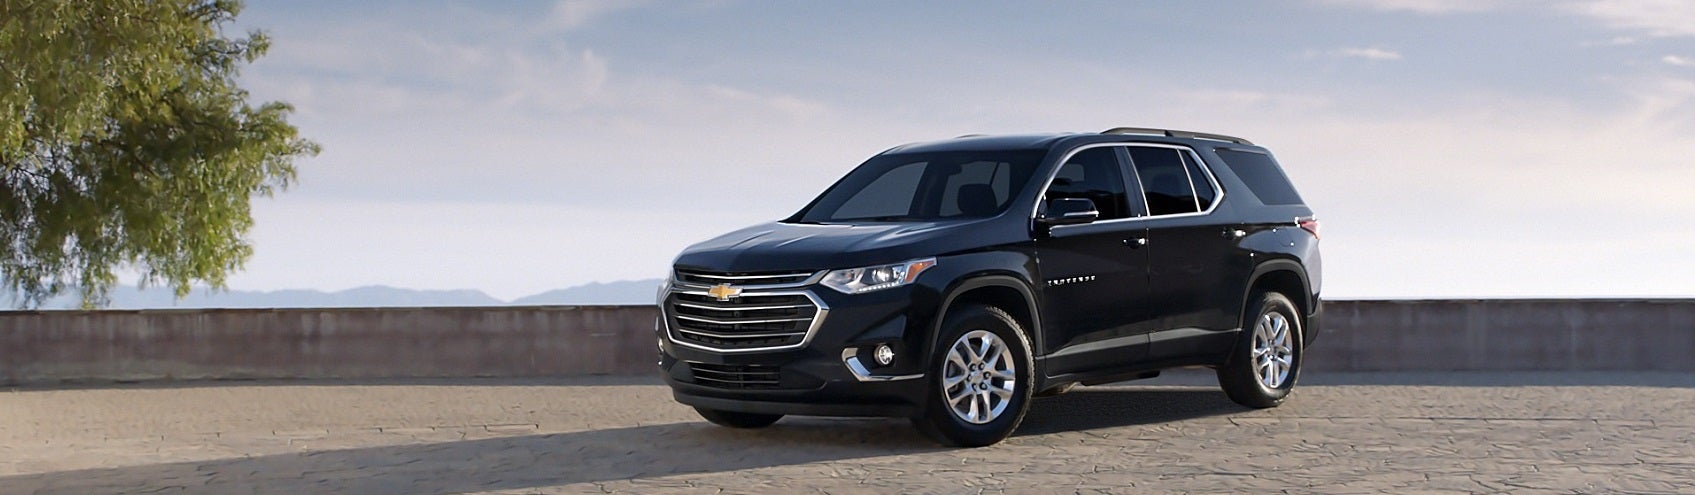 2019 Chevy Traverse for Sale near Columbus, OH